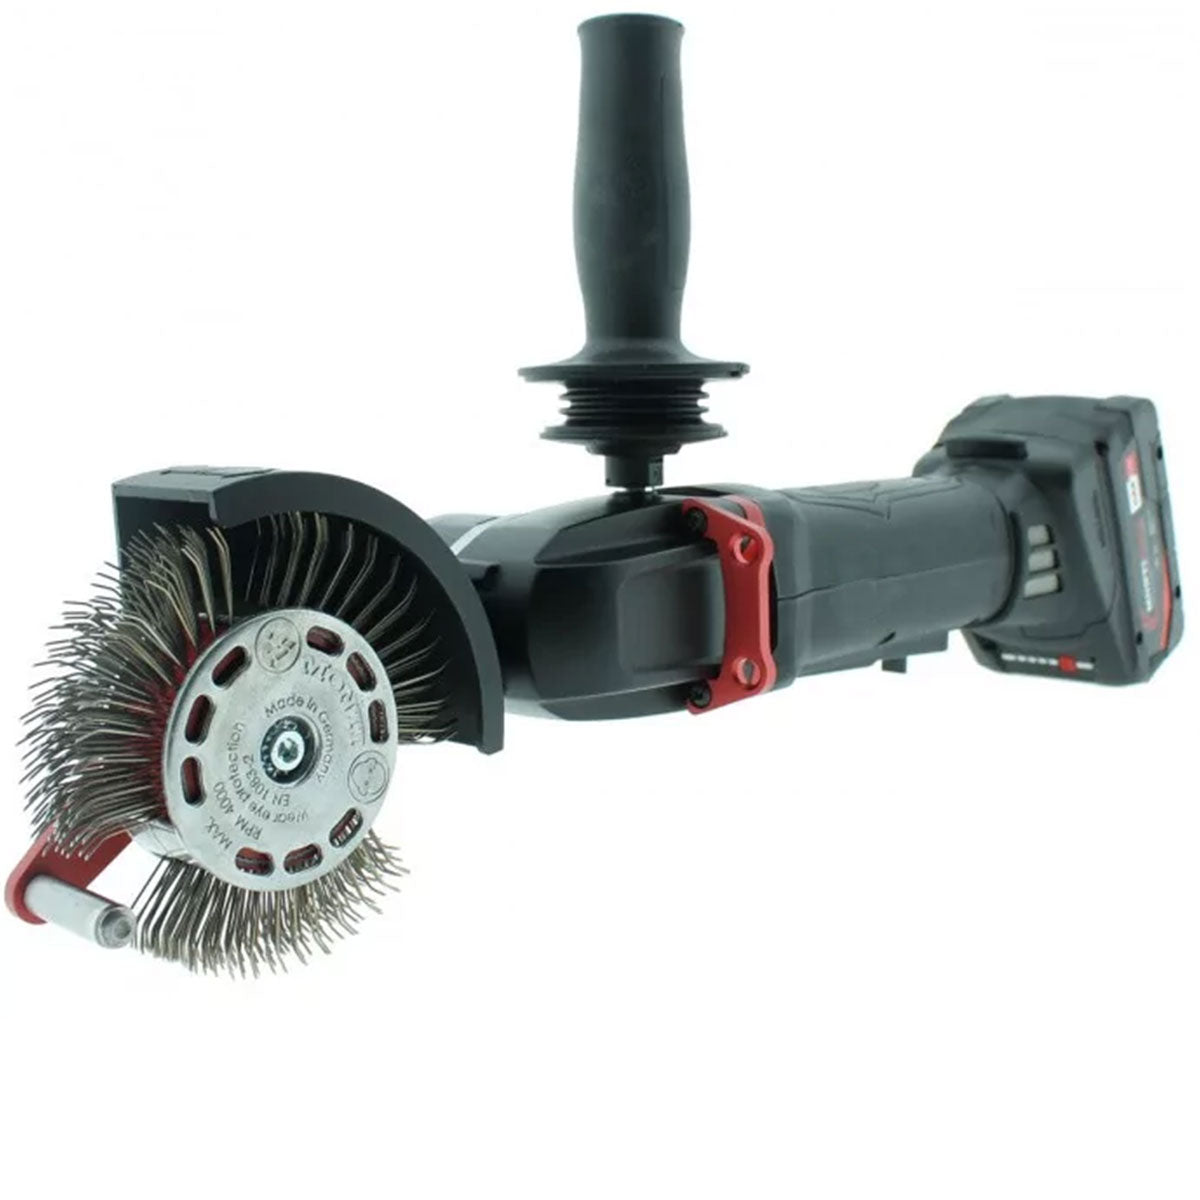 Bristle Blaster Cordless. With 18V 8.0Ah Battery and Charger. (SB-603-BMC)